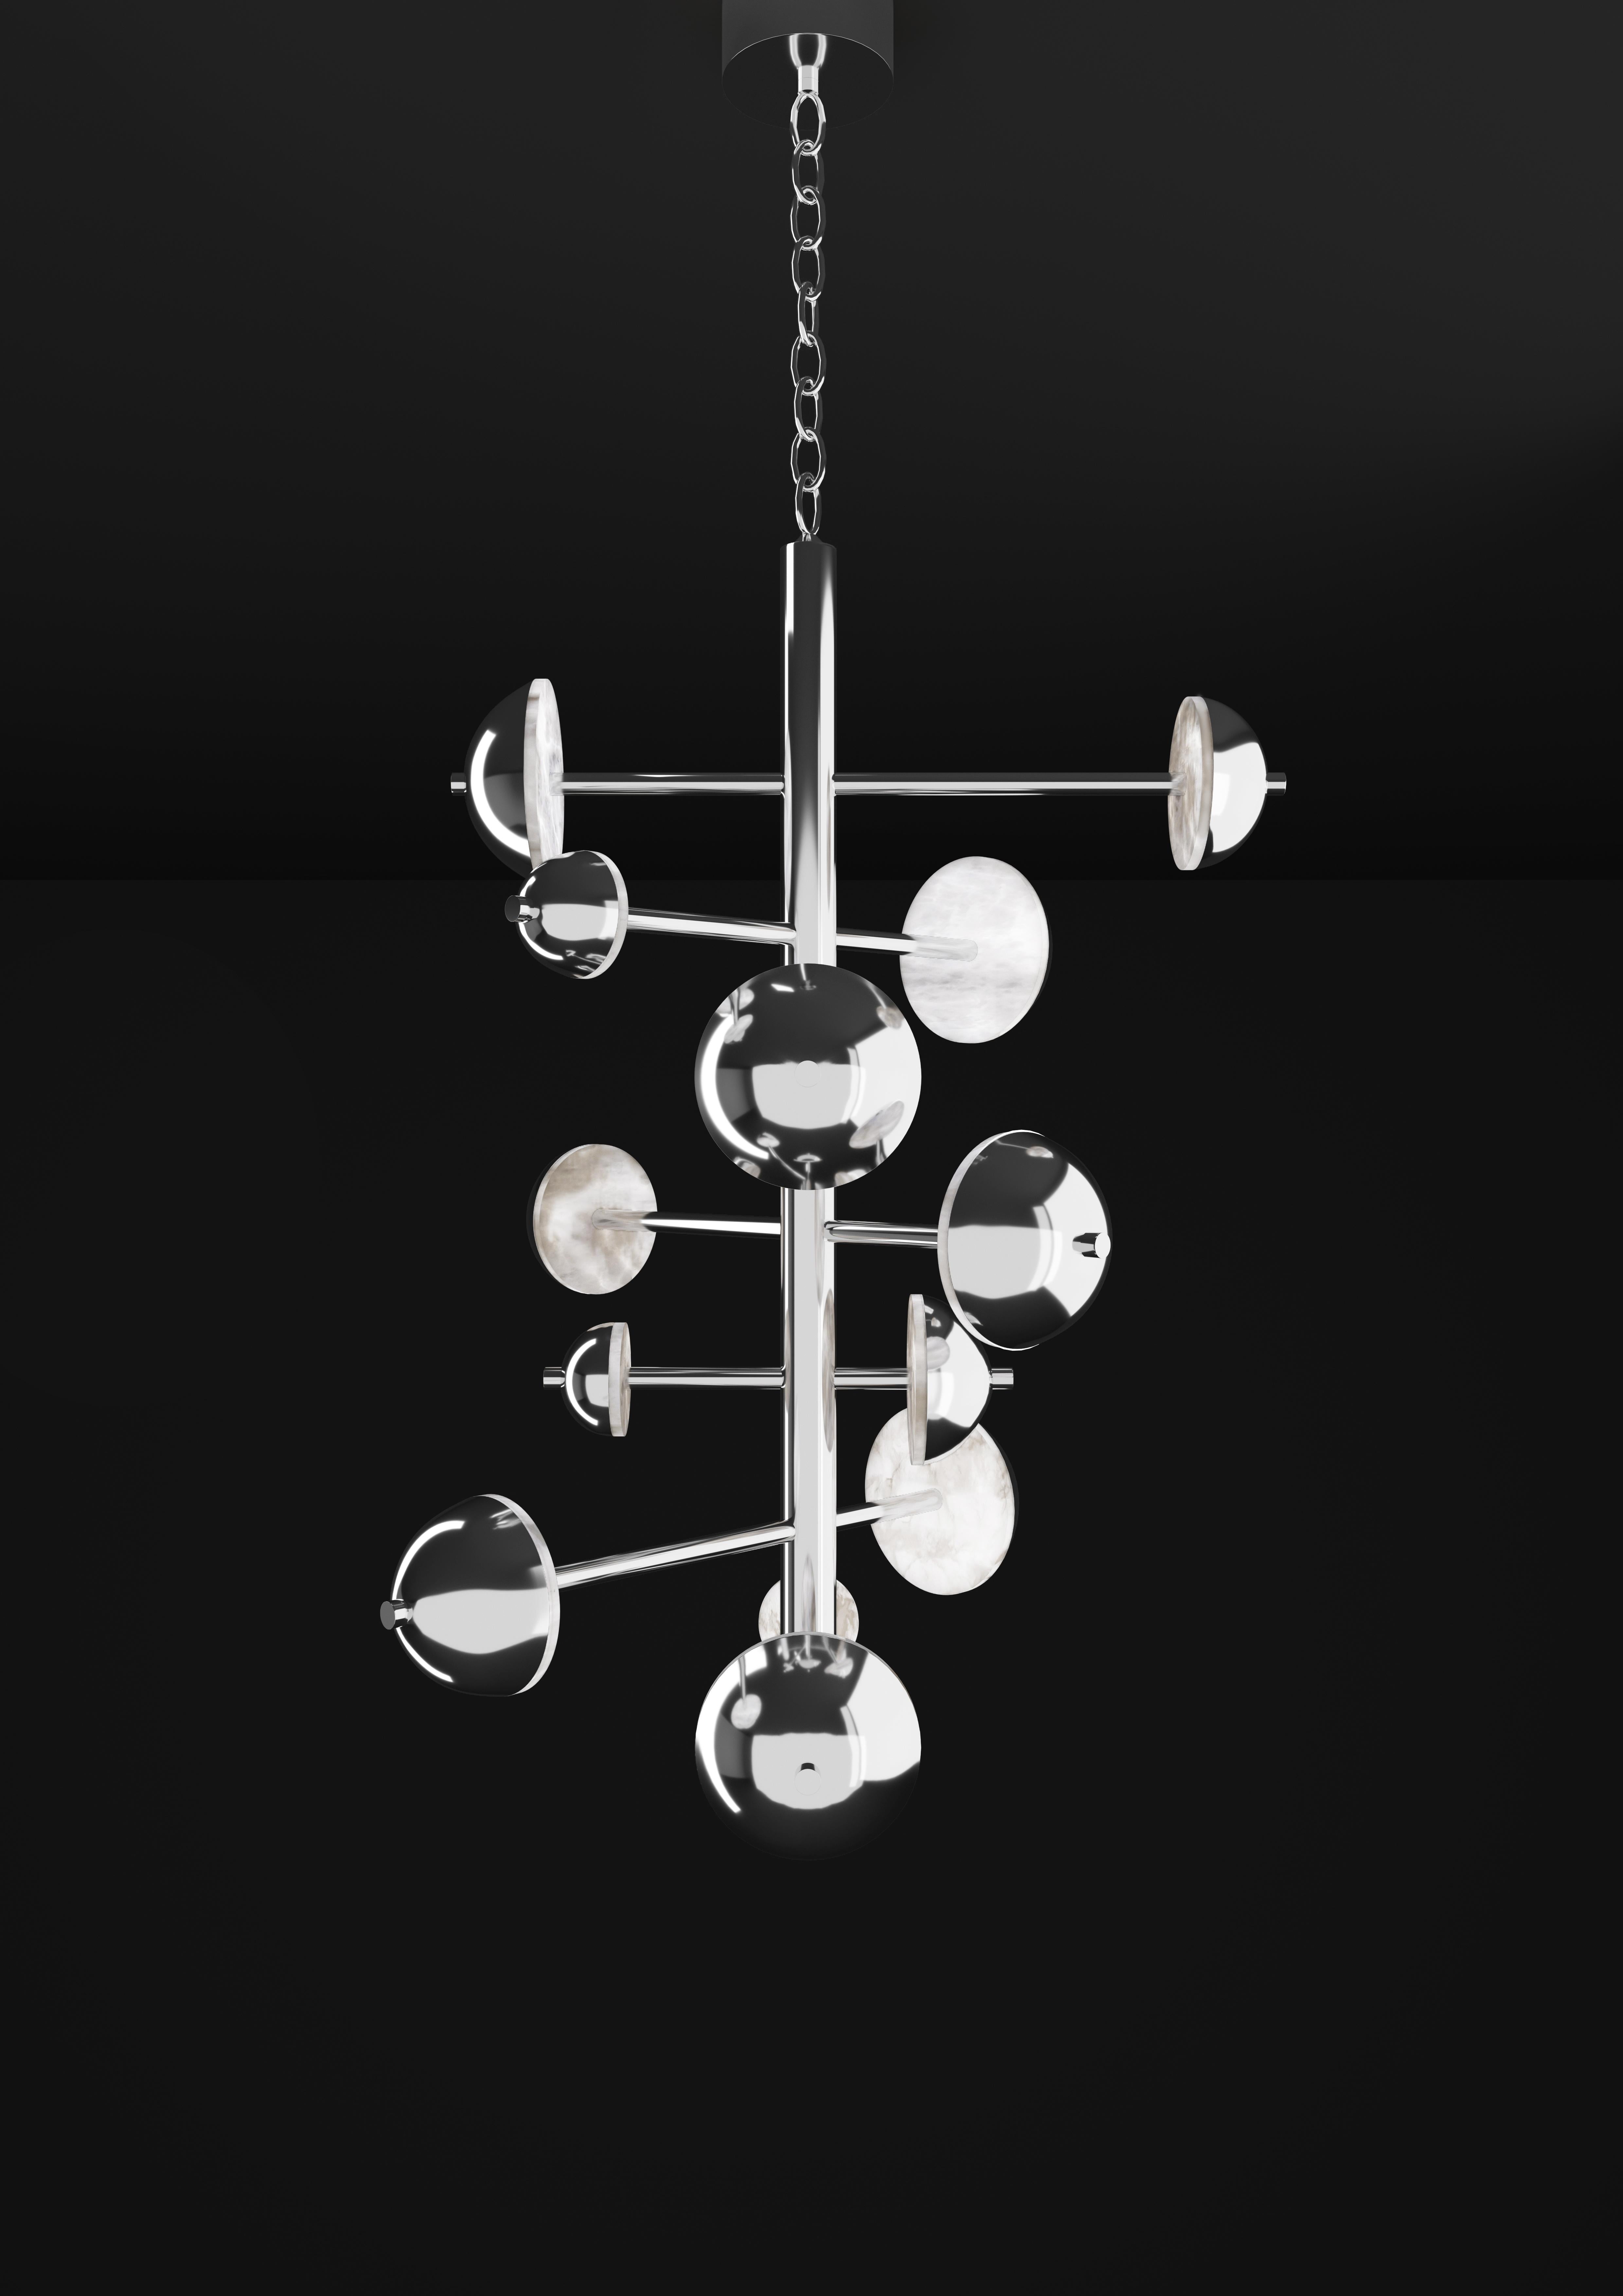 Ares Shiny Silver Metal Chandelier by Alabastro Italiano
Dimensions: D 74,5 x W 73 x H 110 cm.
Materials: White alabaster and metal.

Available in different finishes: Shiny Silver, Bronze, Brushed Brass, Ruggine of Florence, Brushed Burnished, Shiny